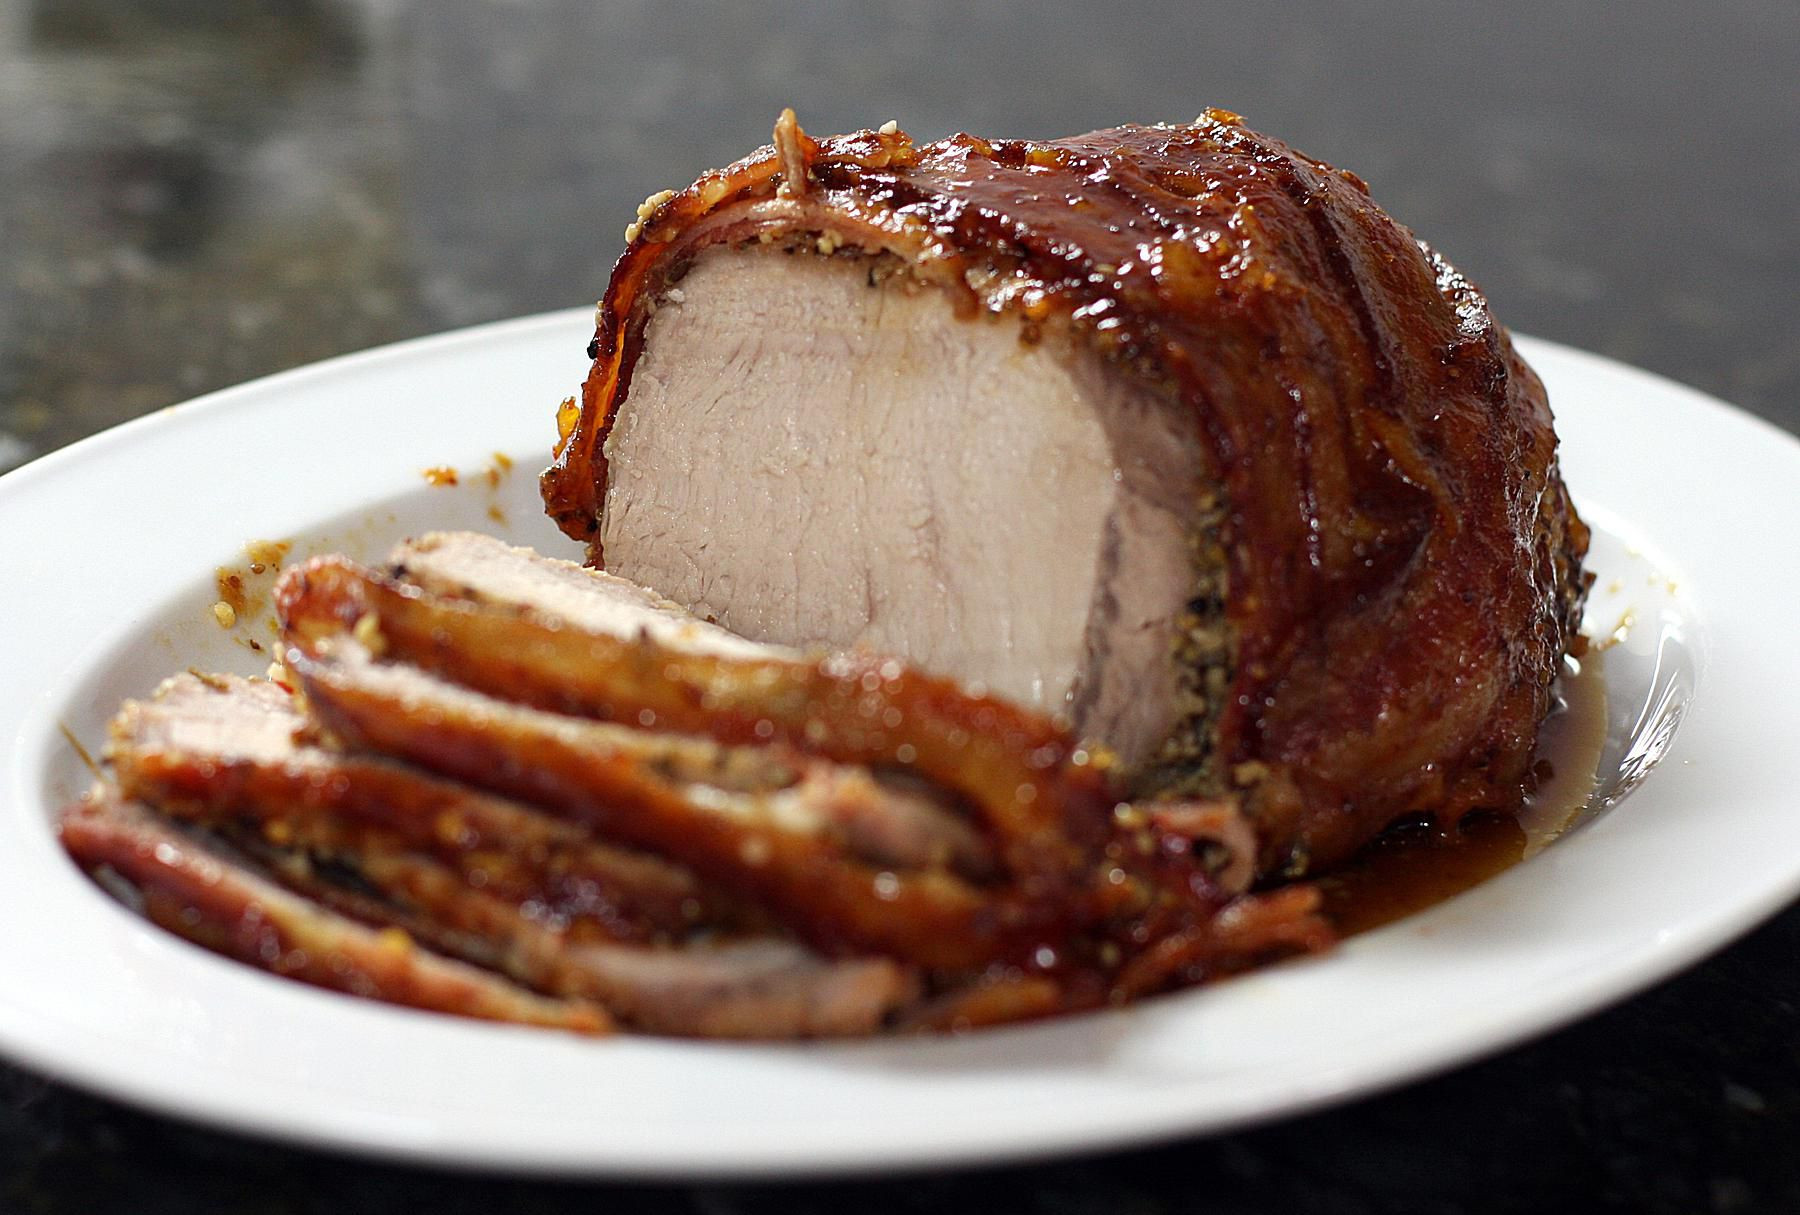 Slow Cook Pork Loin In Oven
 Pork Loin for the Slow Cooker Oven and Stovetop Recipes